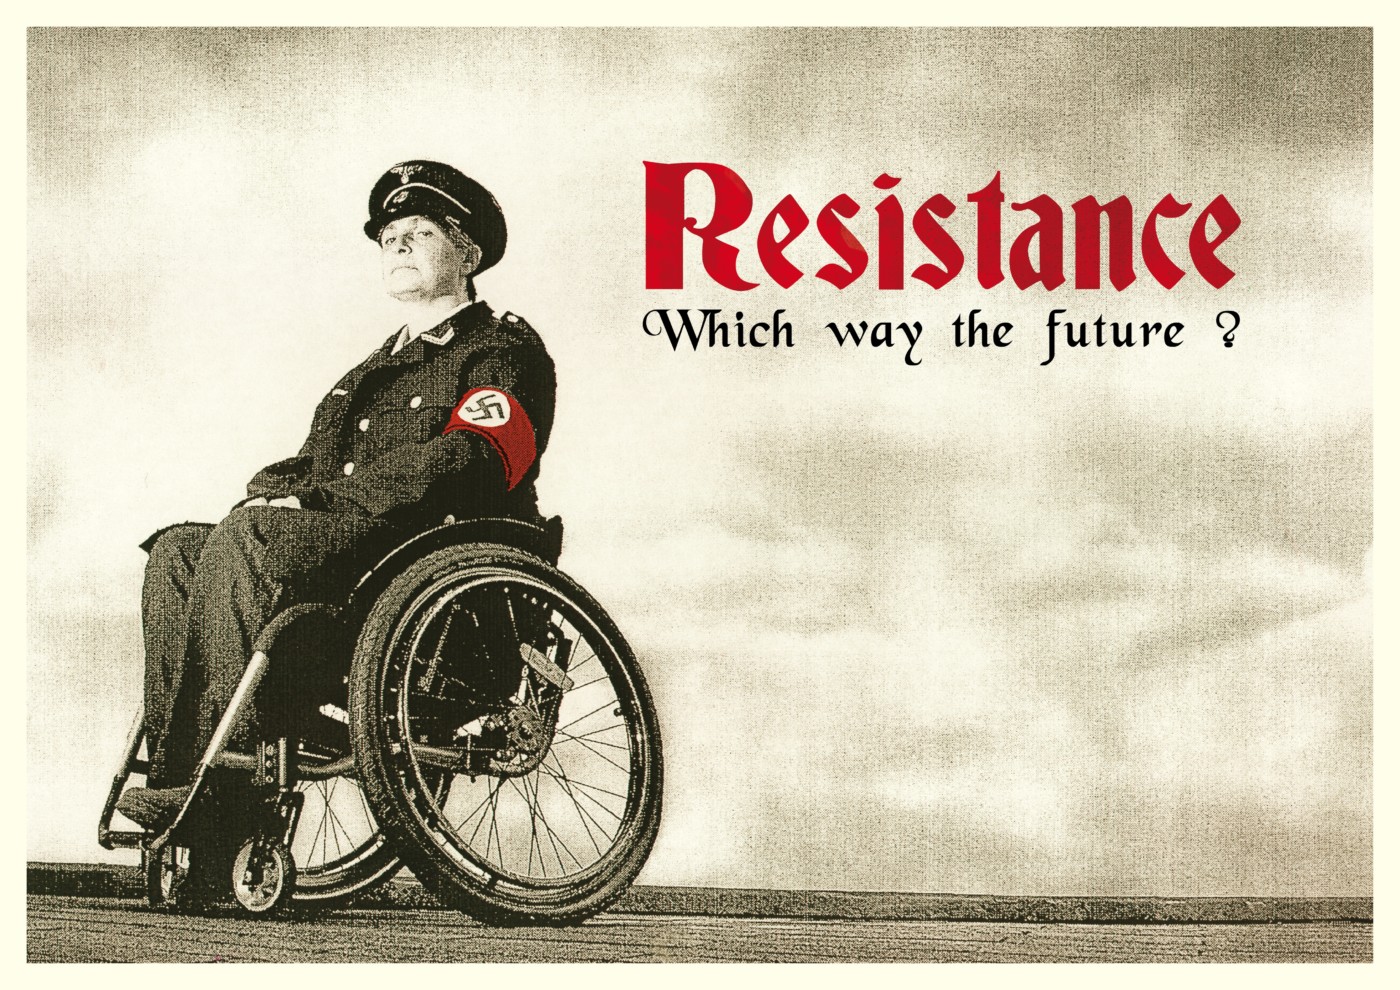 Against a bleak, indeterminate backdrop, a woman sits on a wheelchair, dressed in Nazi uniform and regalia, her gaze angled directly at the viewer. The text reads ‘Resistance: Which way the future?’ The poster is sepia, except for the swastika armband and text, in bright red.